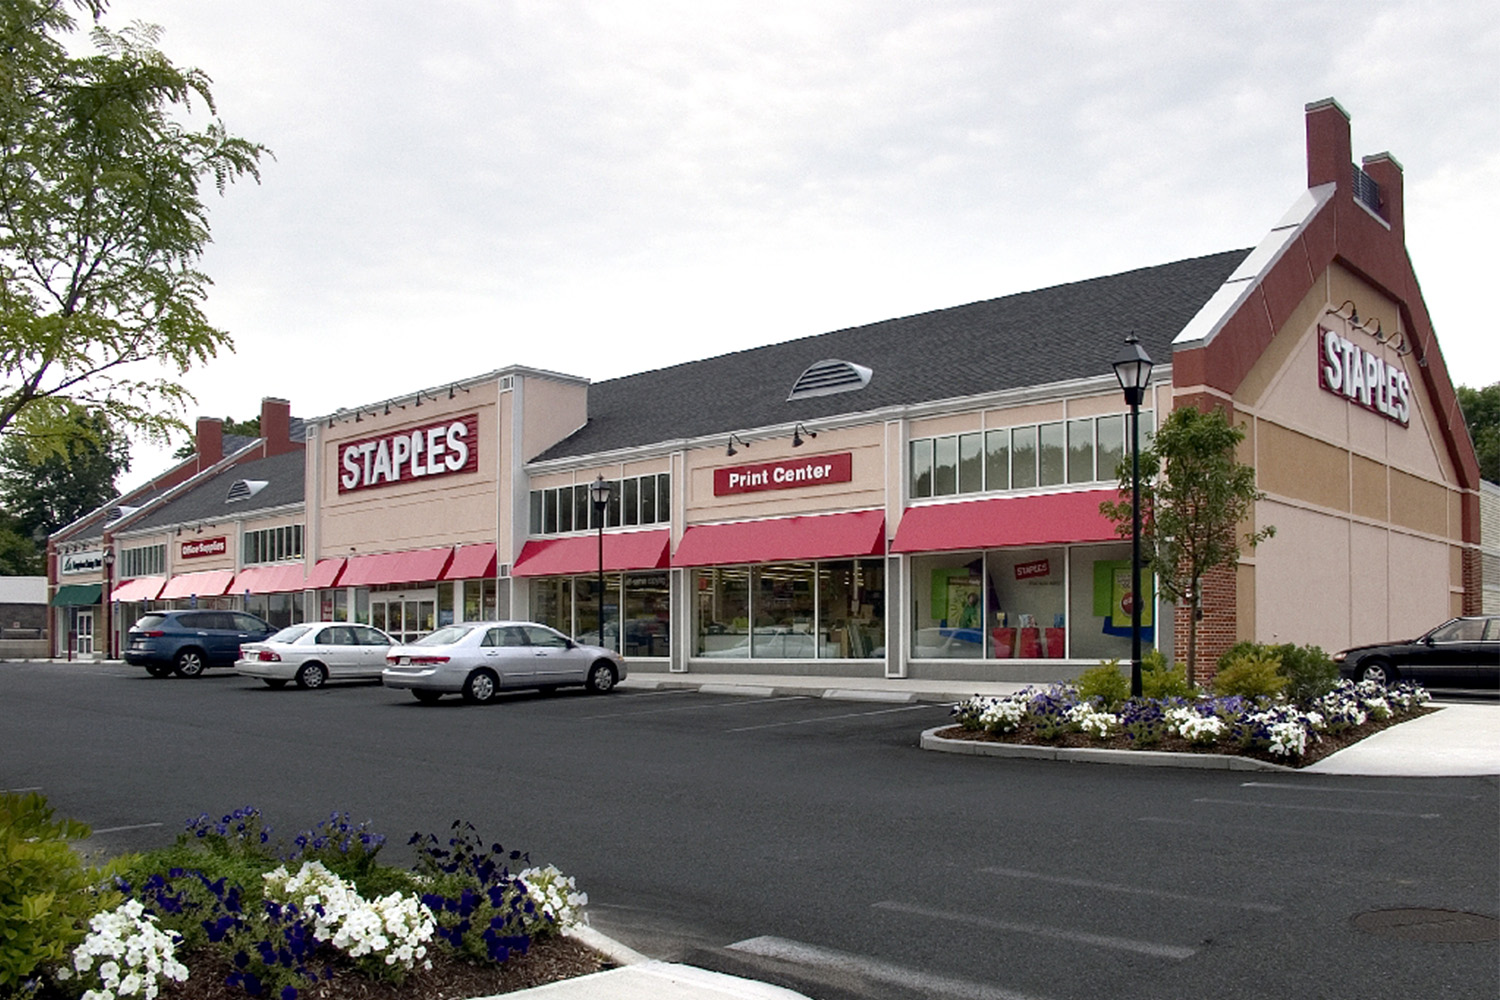 Staples and other tenants in Eaglewood Shops plaza